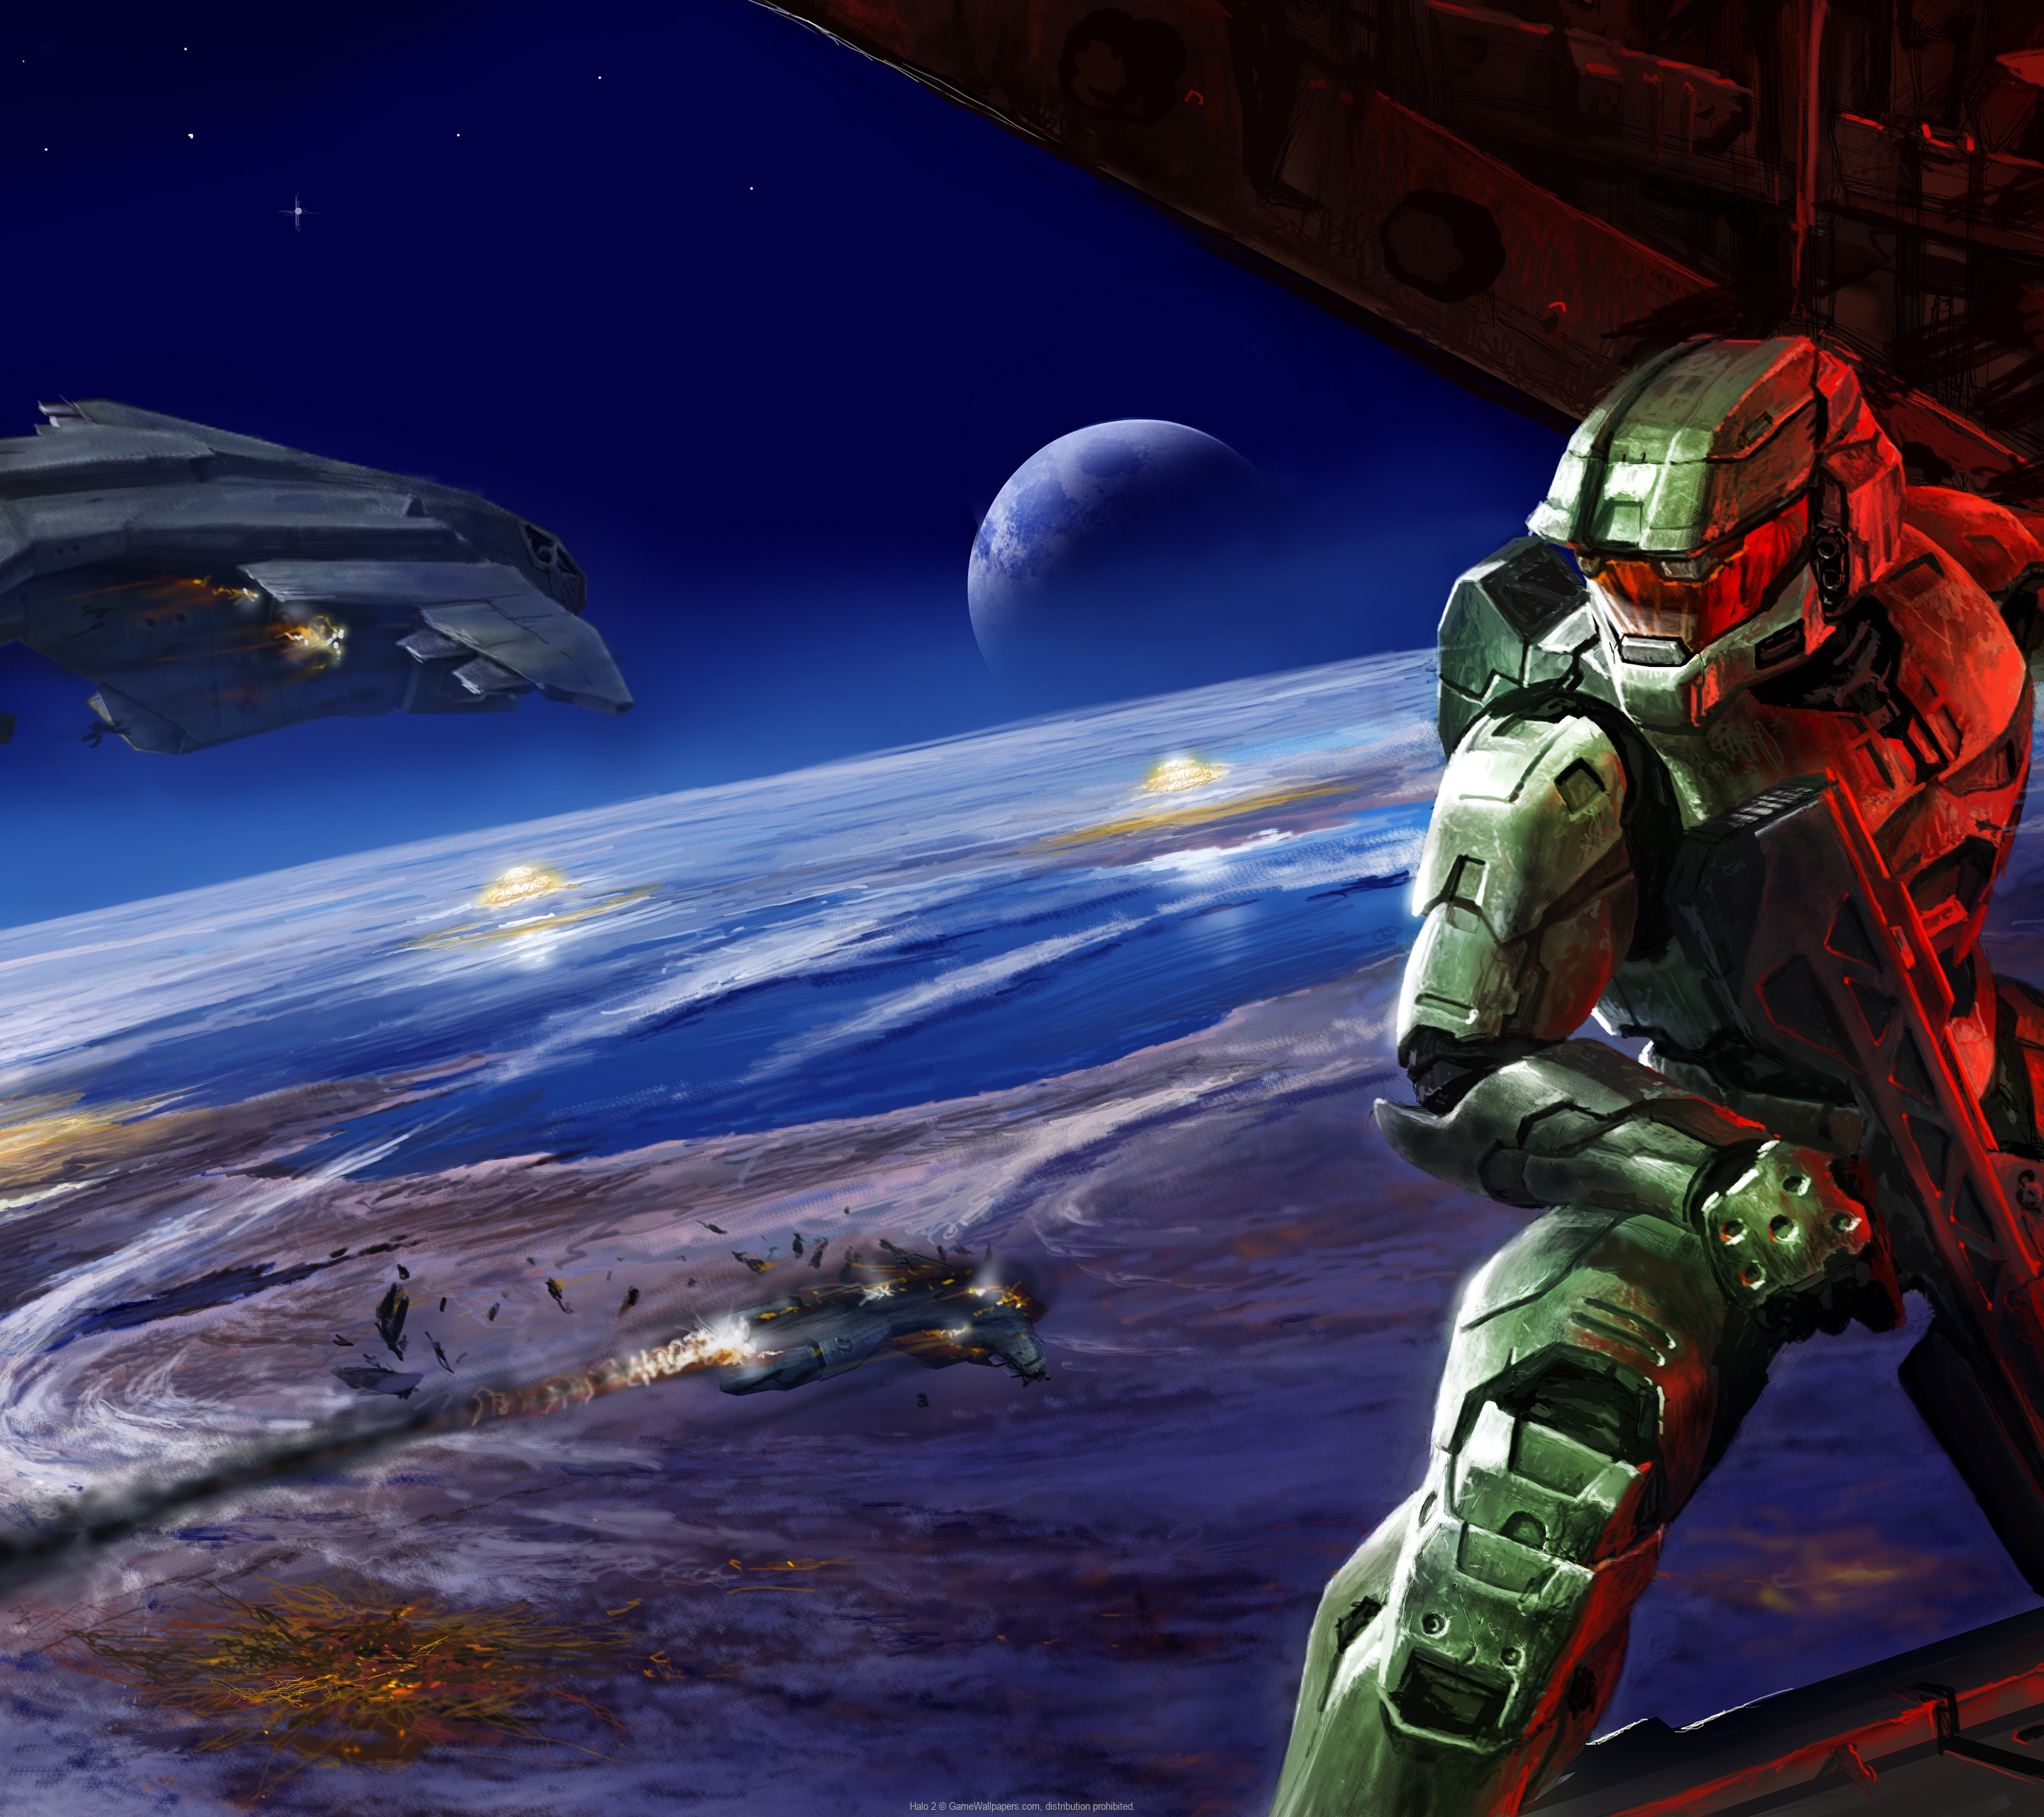 Halo 2 1440p Horizontal Mobile wallpaper or background 18